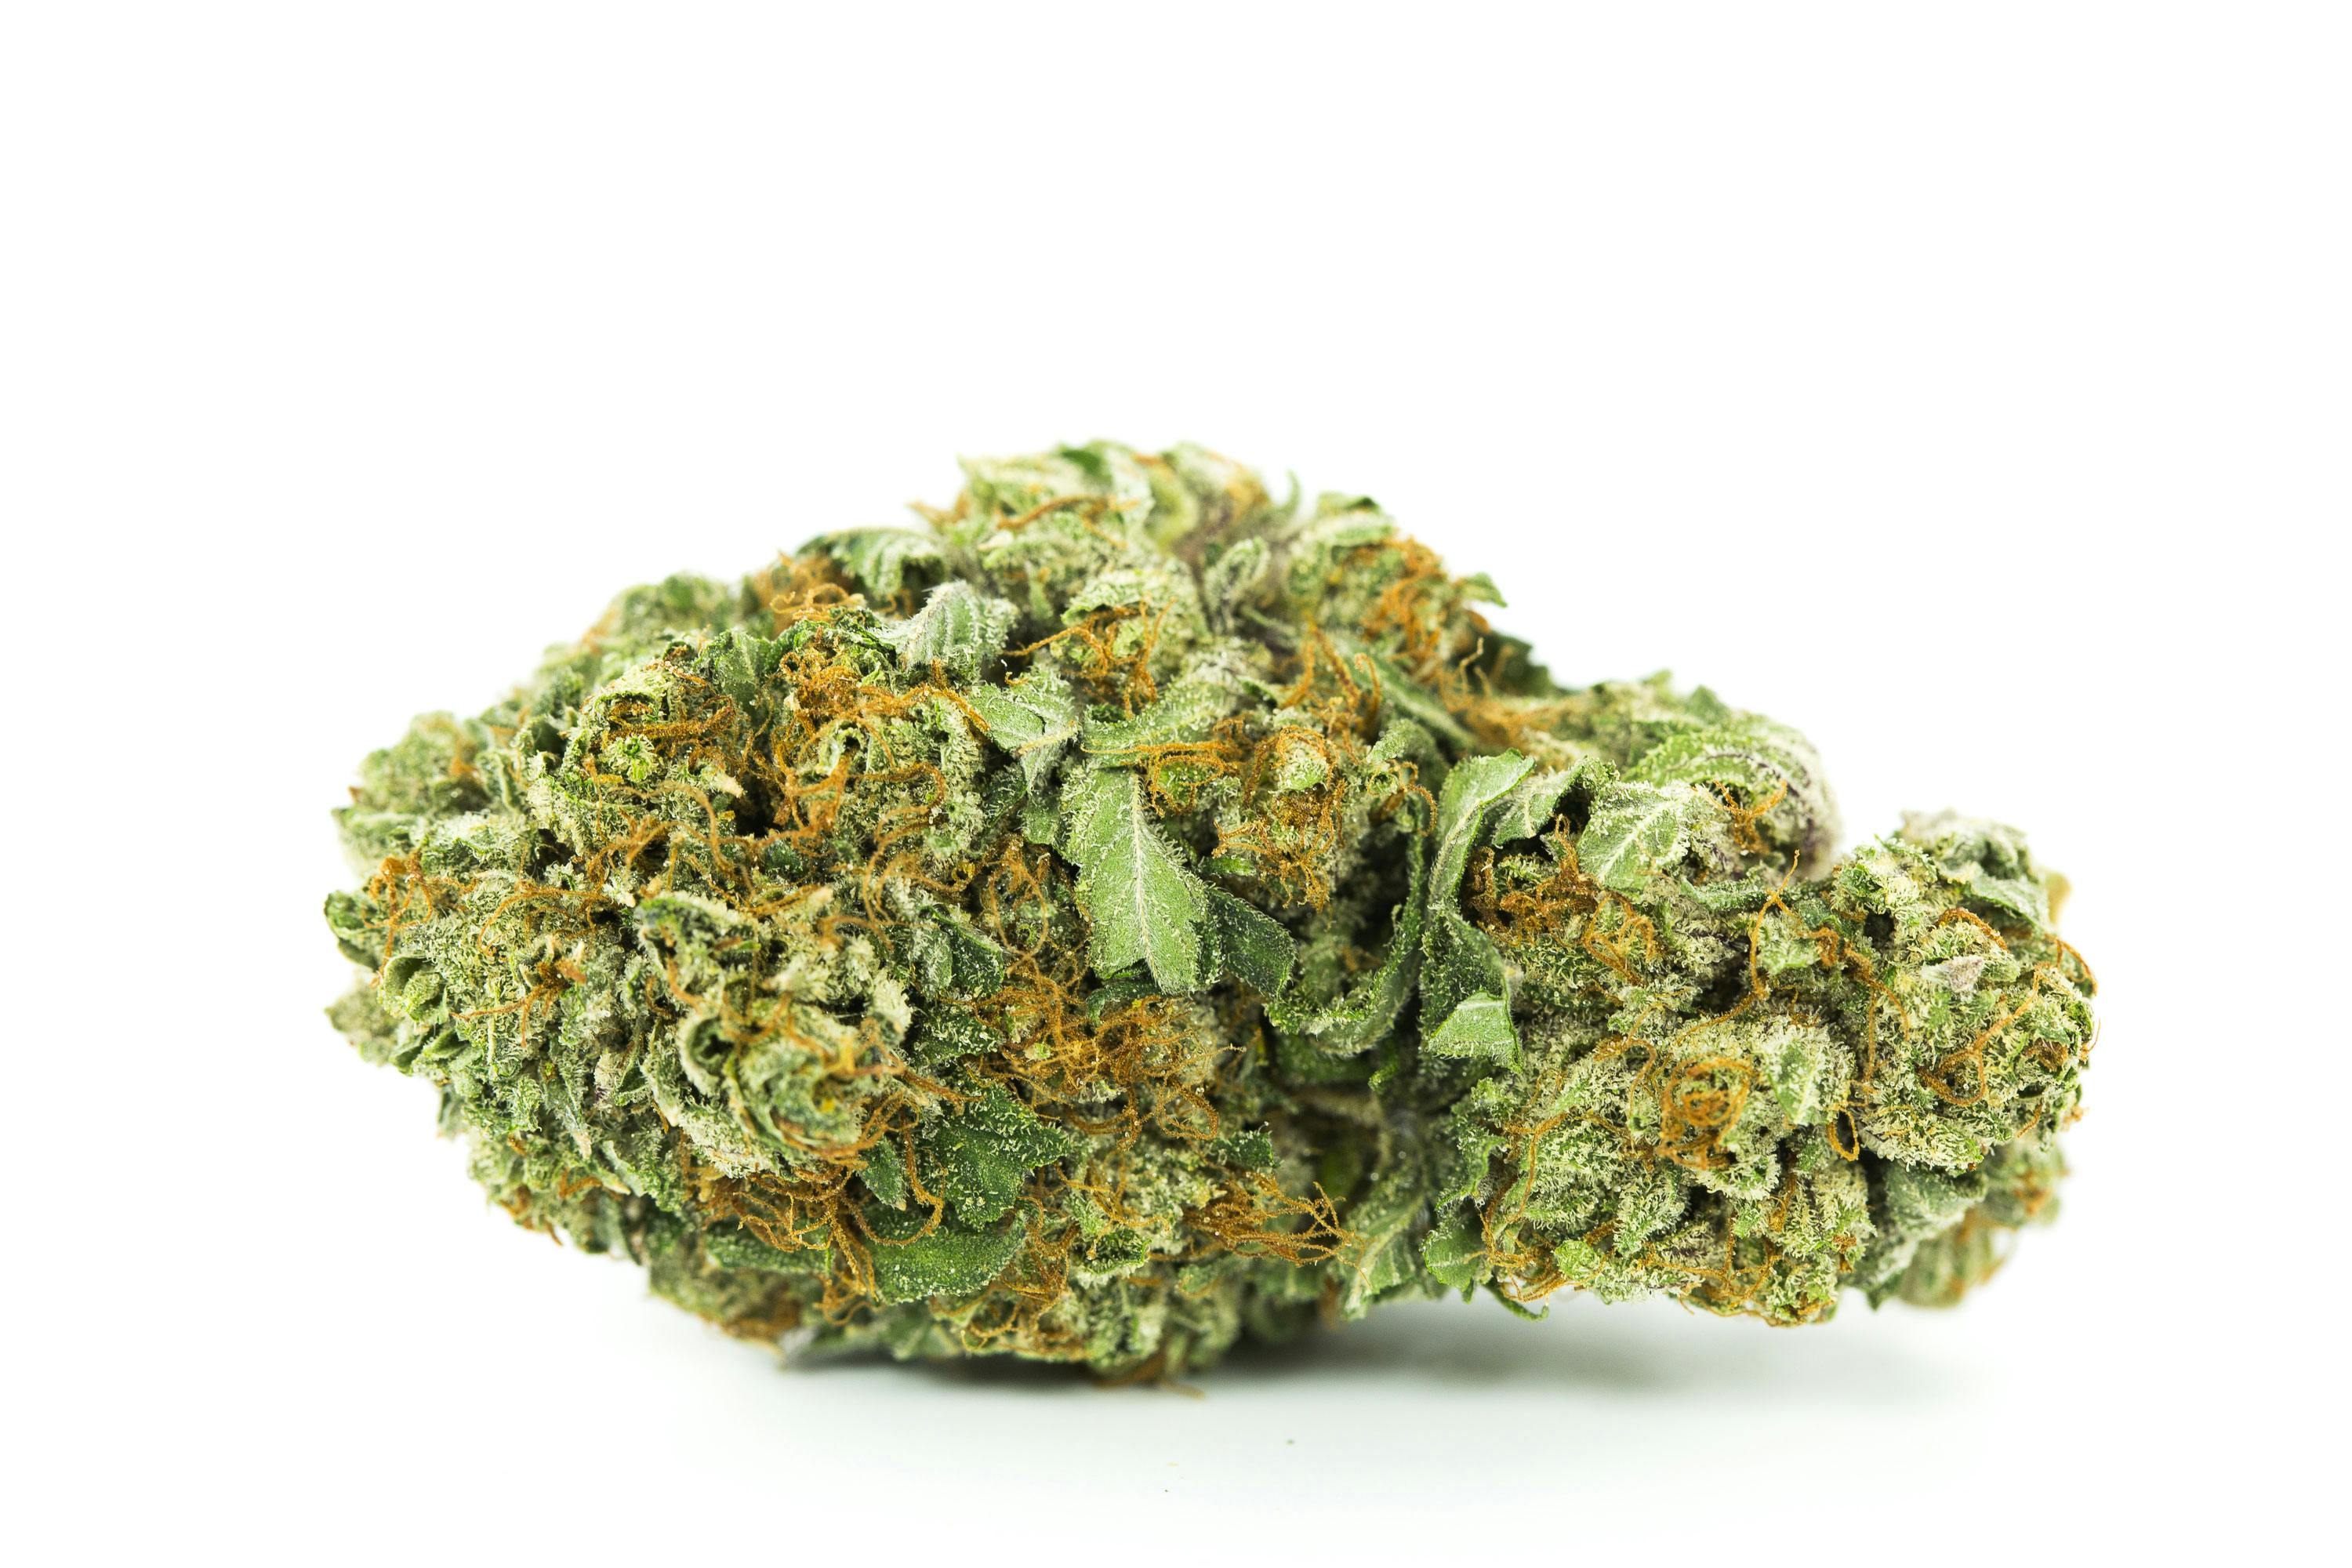 7Best Star Wars Strains To Take You To A Galaxy Far Far Away Best Star Wars Strains To Take You To A Galaxy Far, Far Away